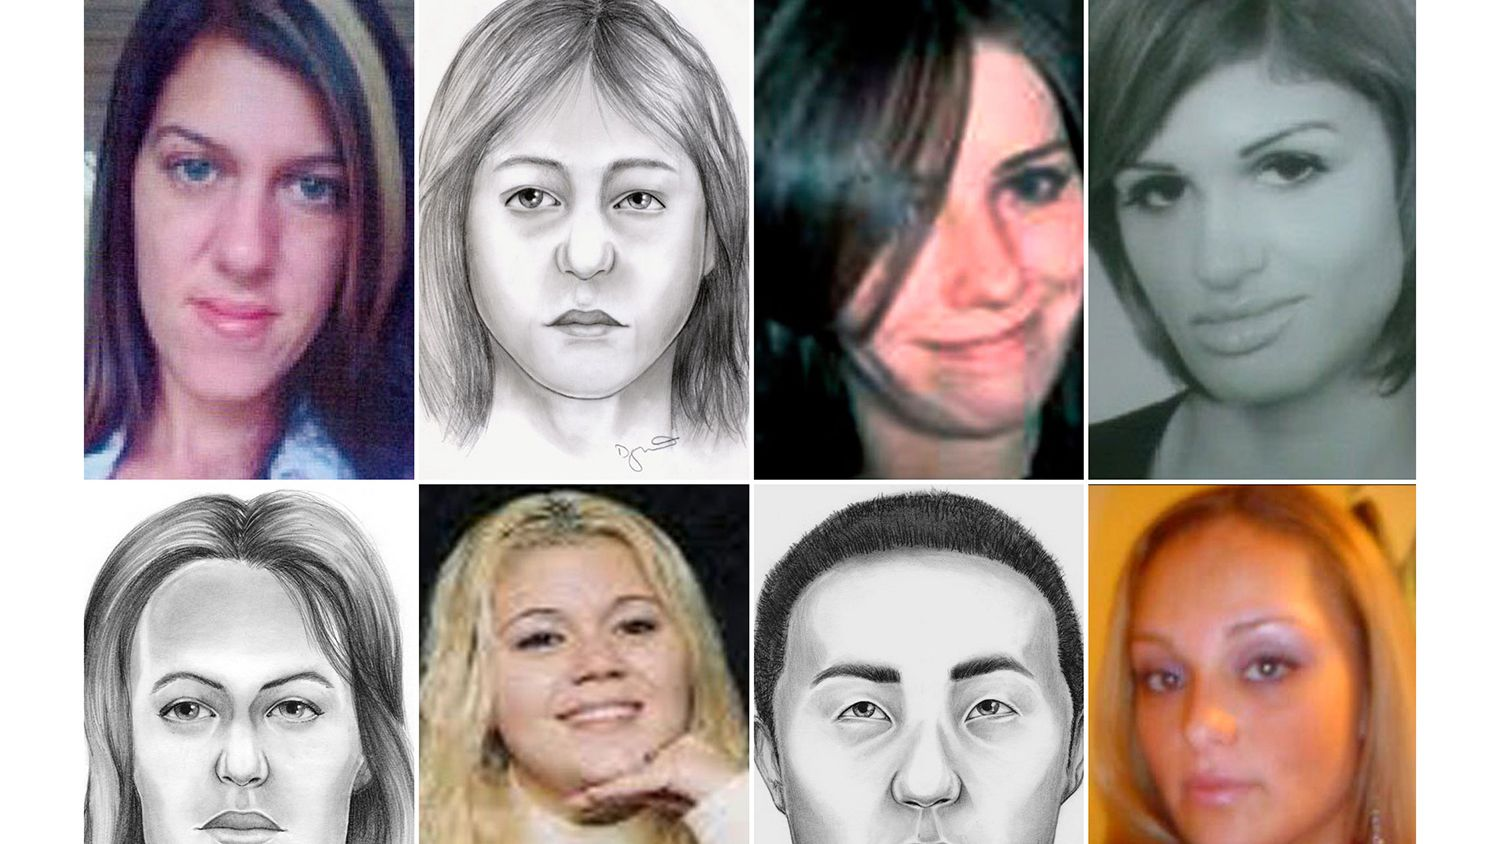 Unsolved: The Long Island Serial Killer